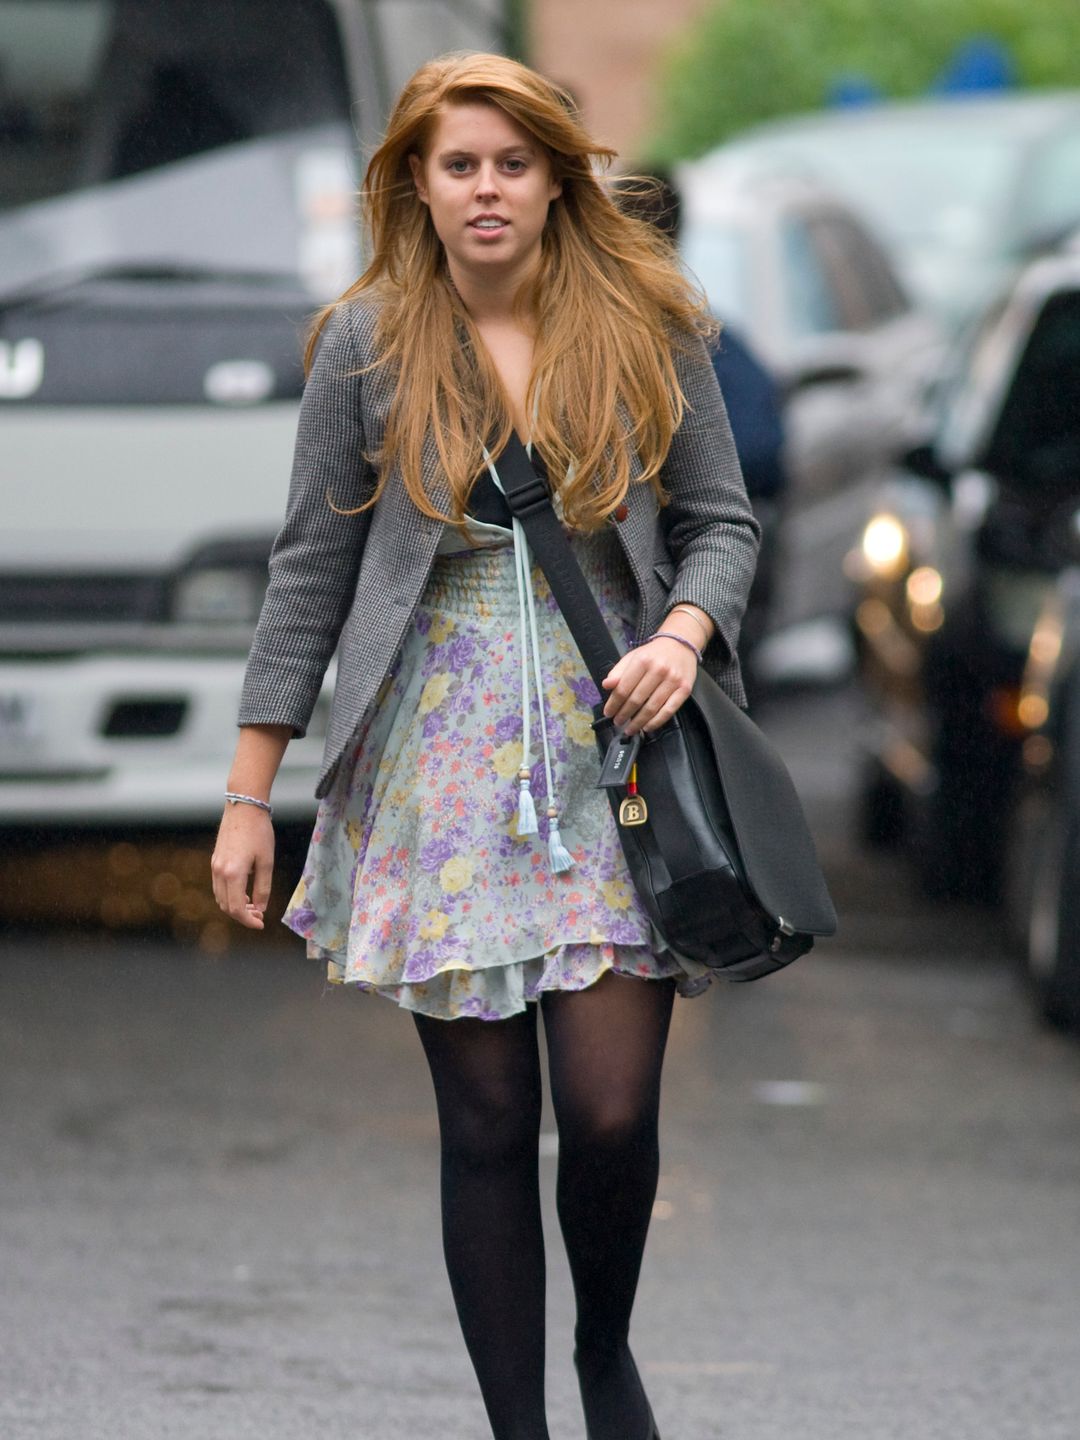 Princess Eugenie walking in a floral mini dress, tights and grey cardigan